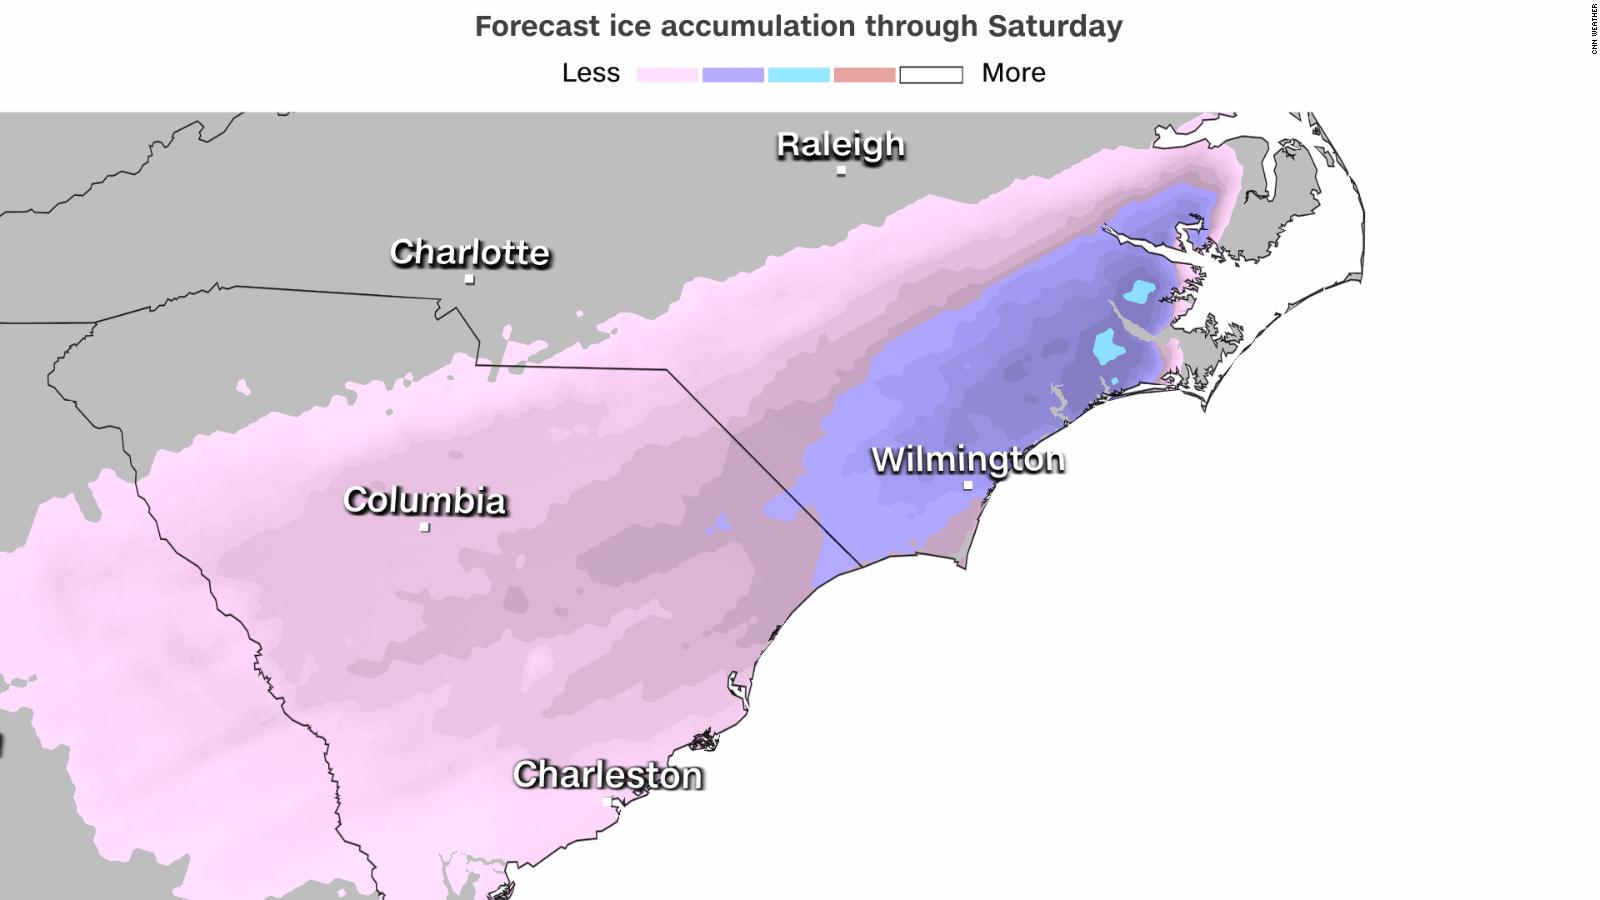 Winter weather Virginia and the Carolinas under states of emergency as